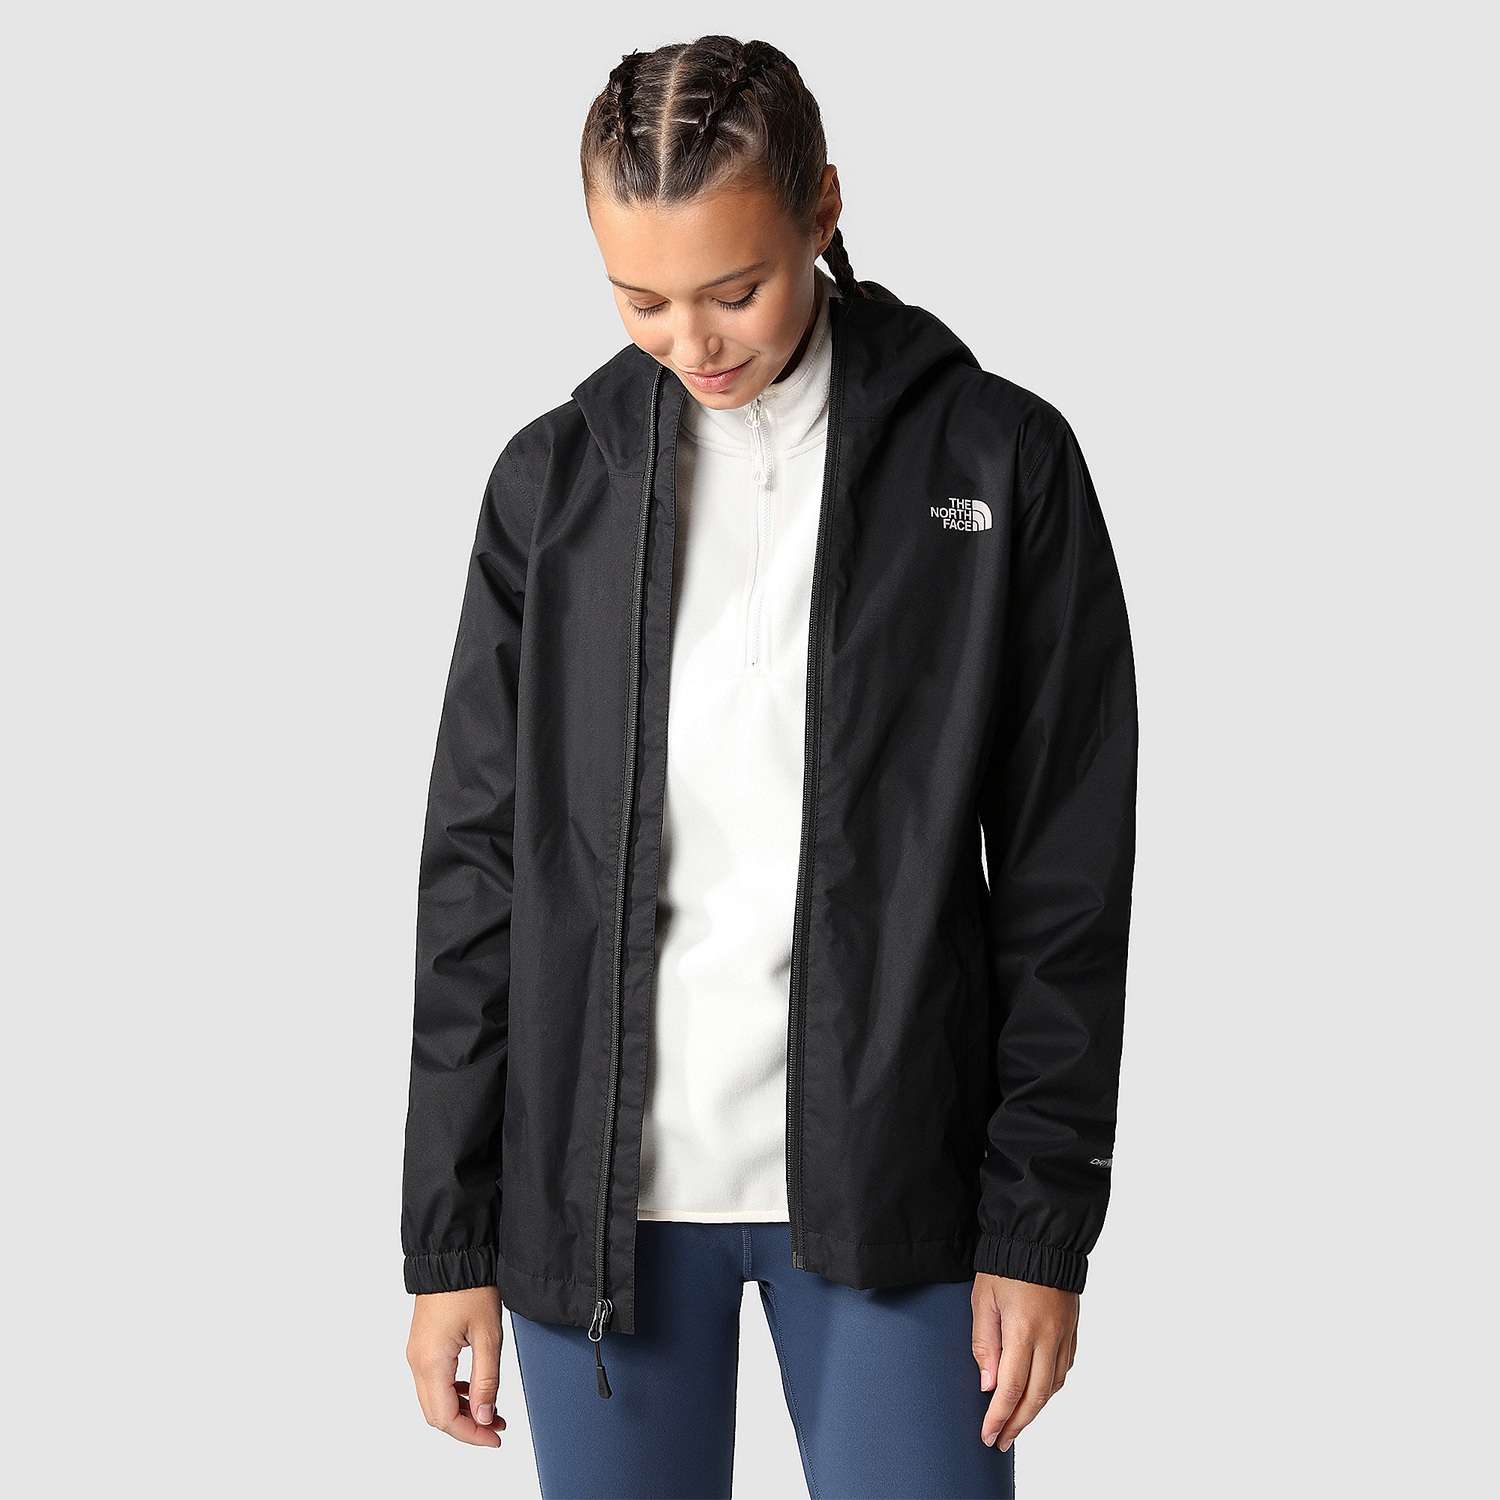 The North Face Quest Giacca - Tnf Black/Foil Grey